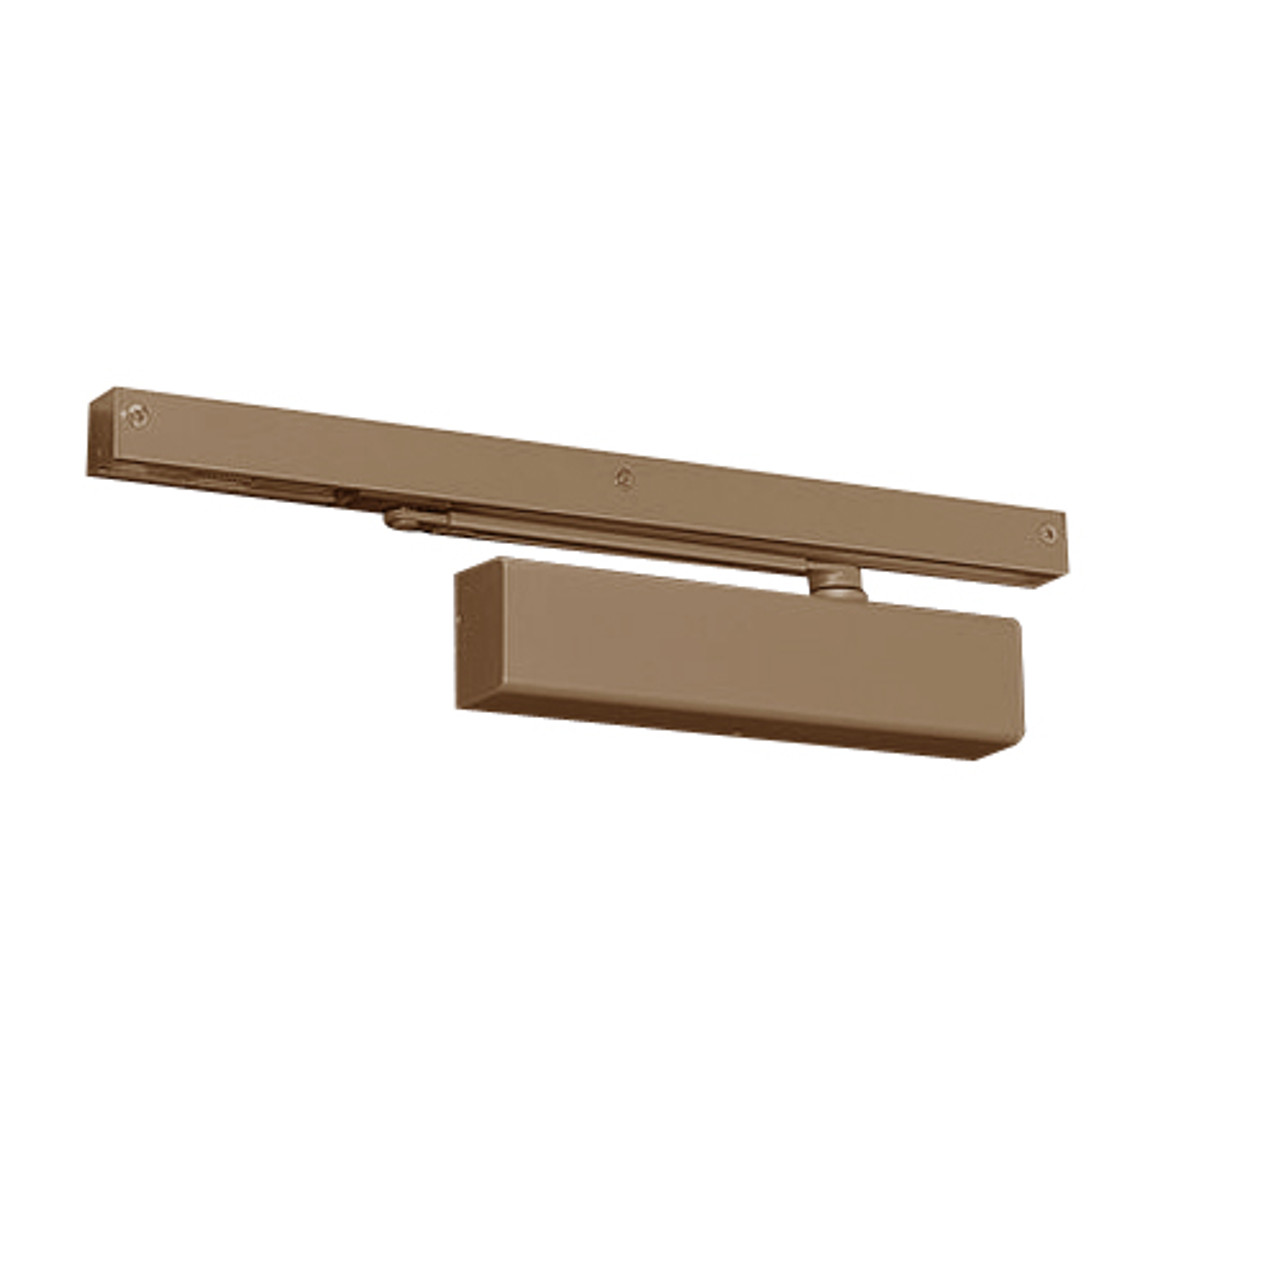 7500STH-691 Norton 7500 Series Hold Open Institutional Door Closer with Pull Side Slide Track in Dull Bronze Finish